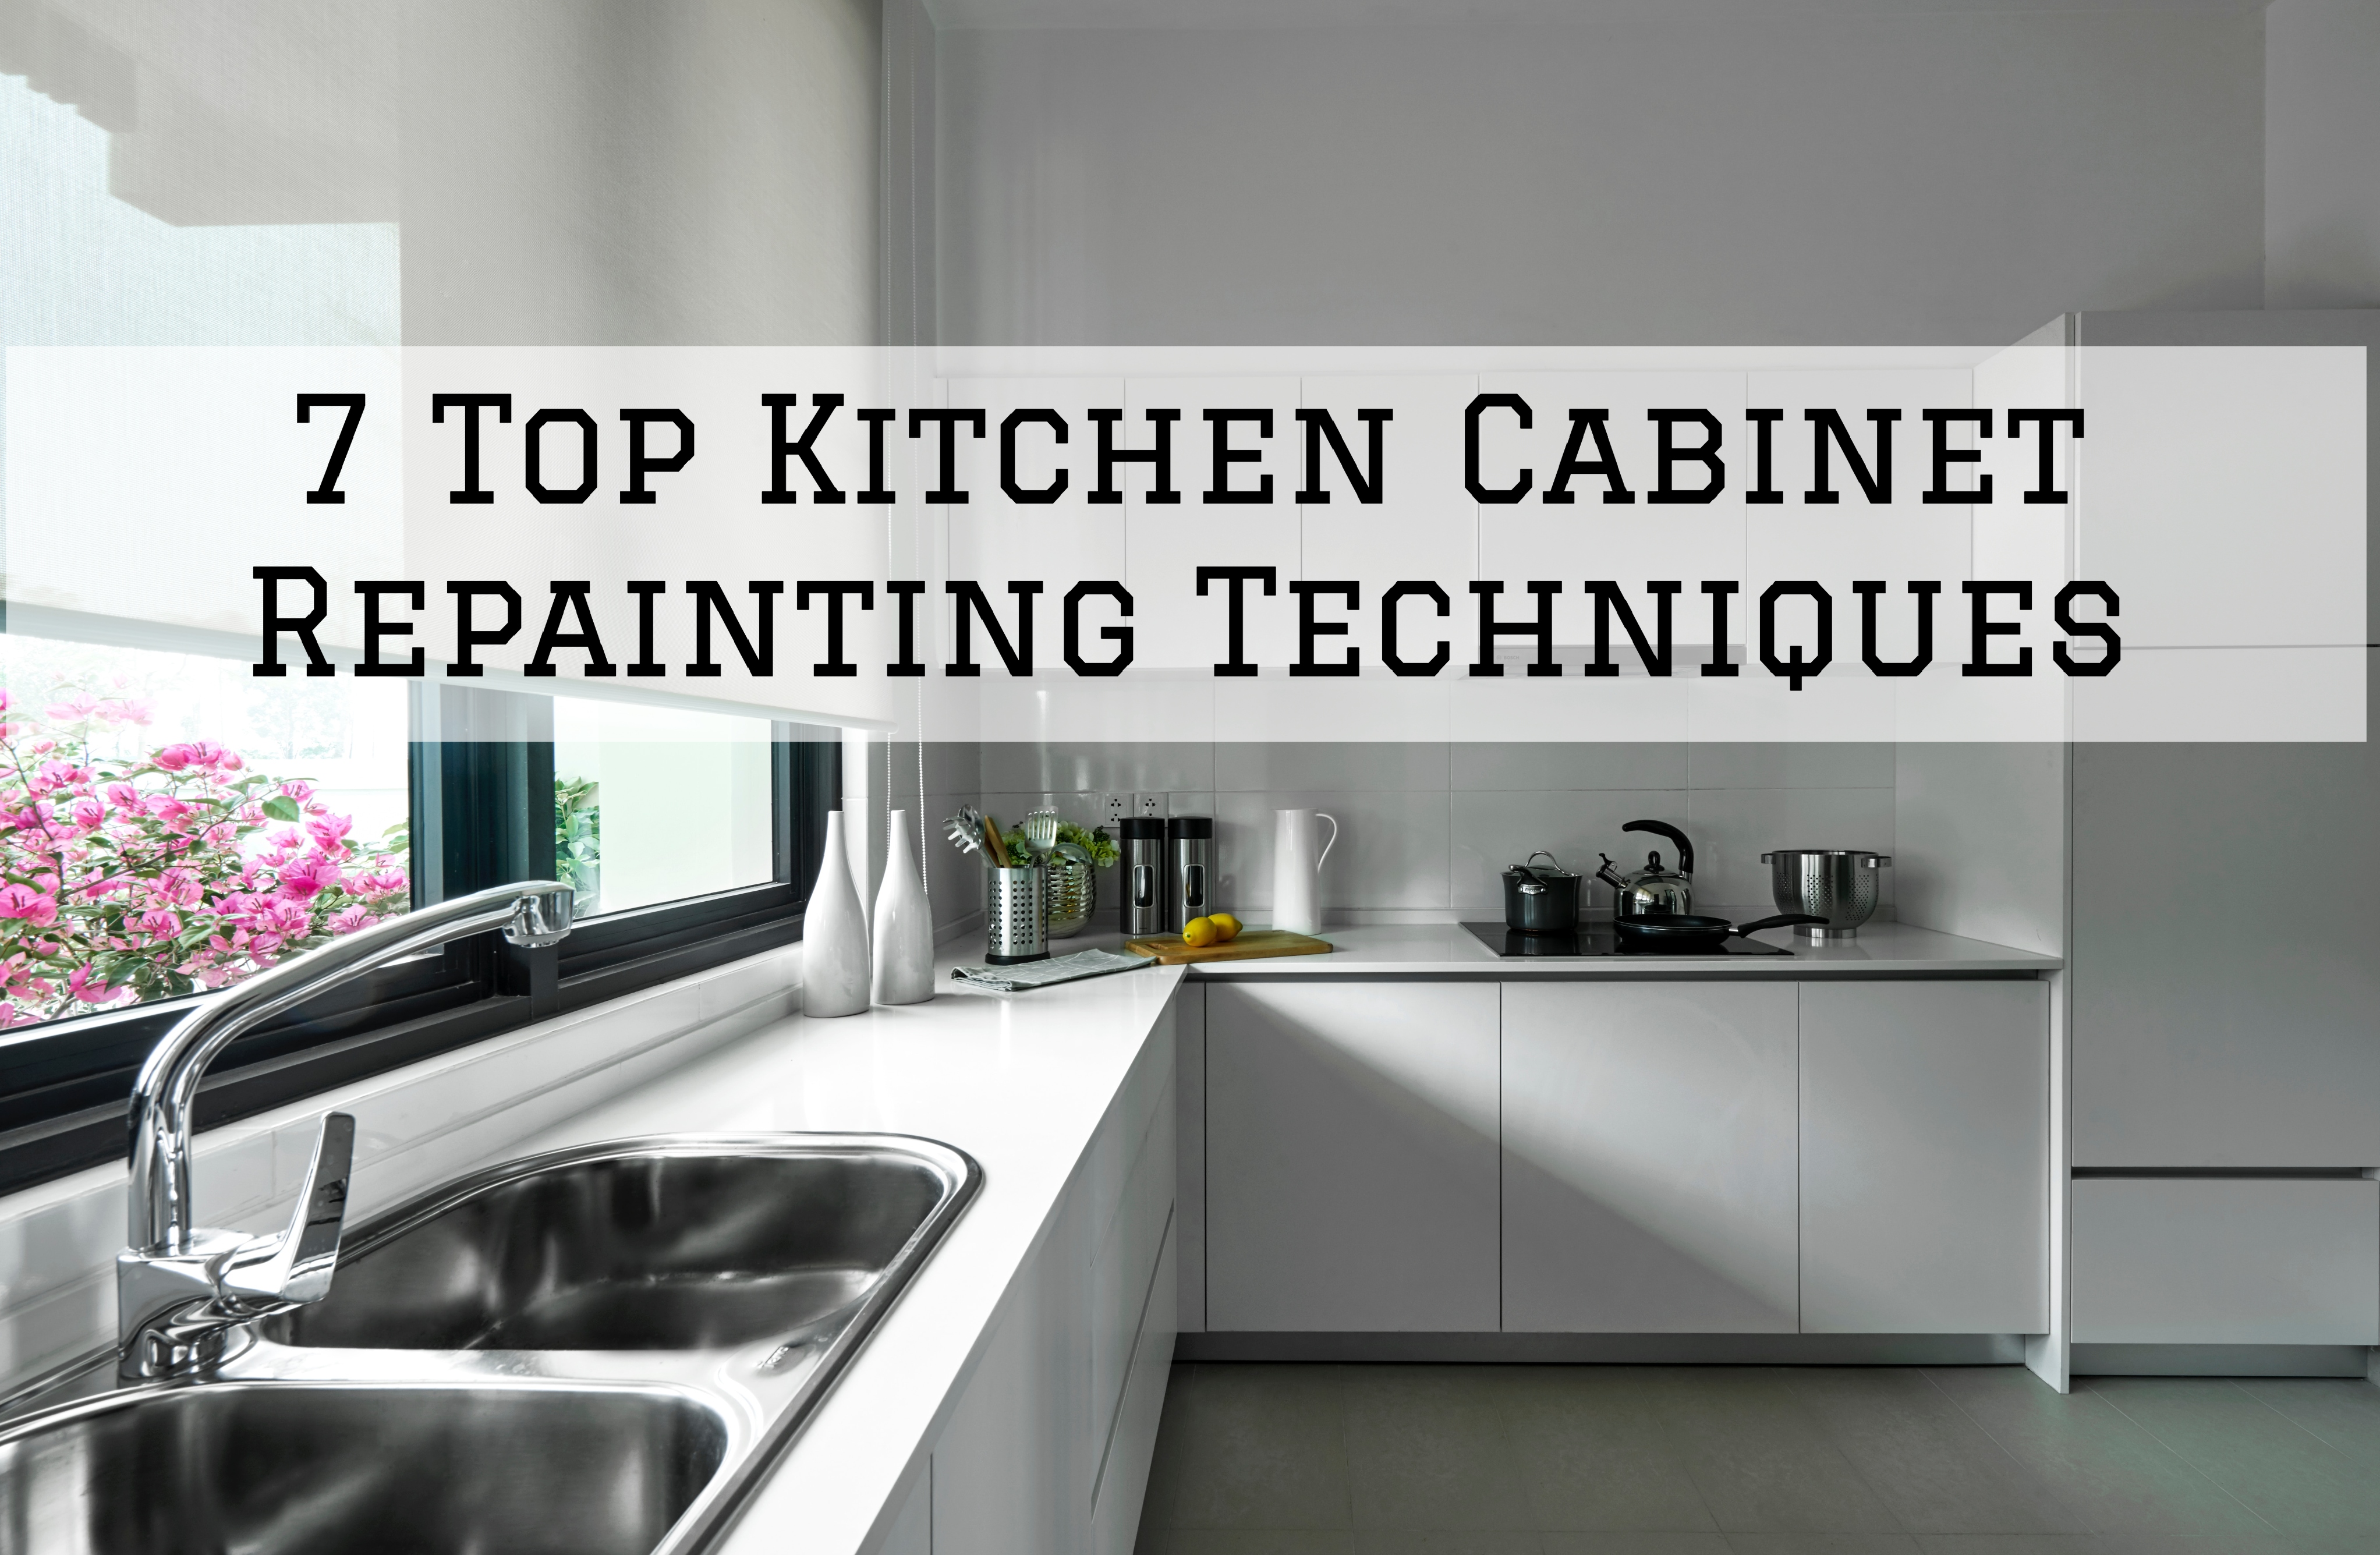 7 Top Kitchen Cabinet Repainting Techniques in Ottawa, Ontario